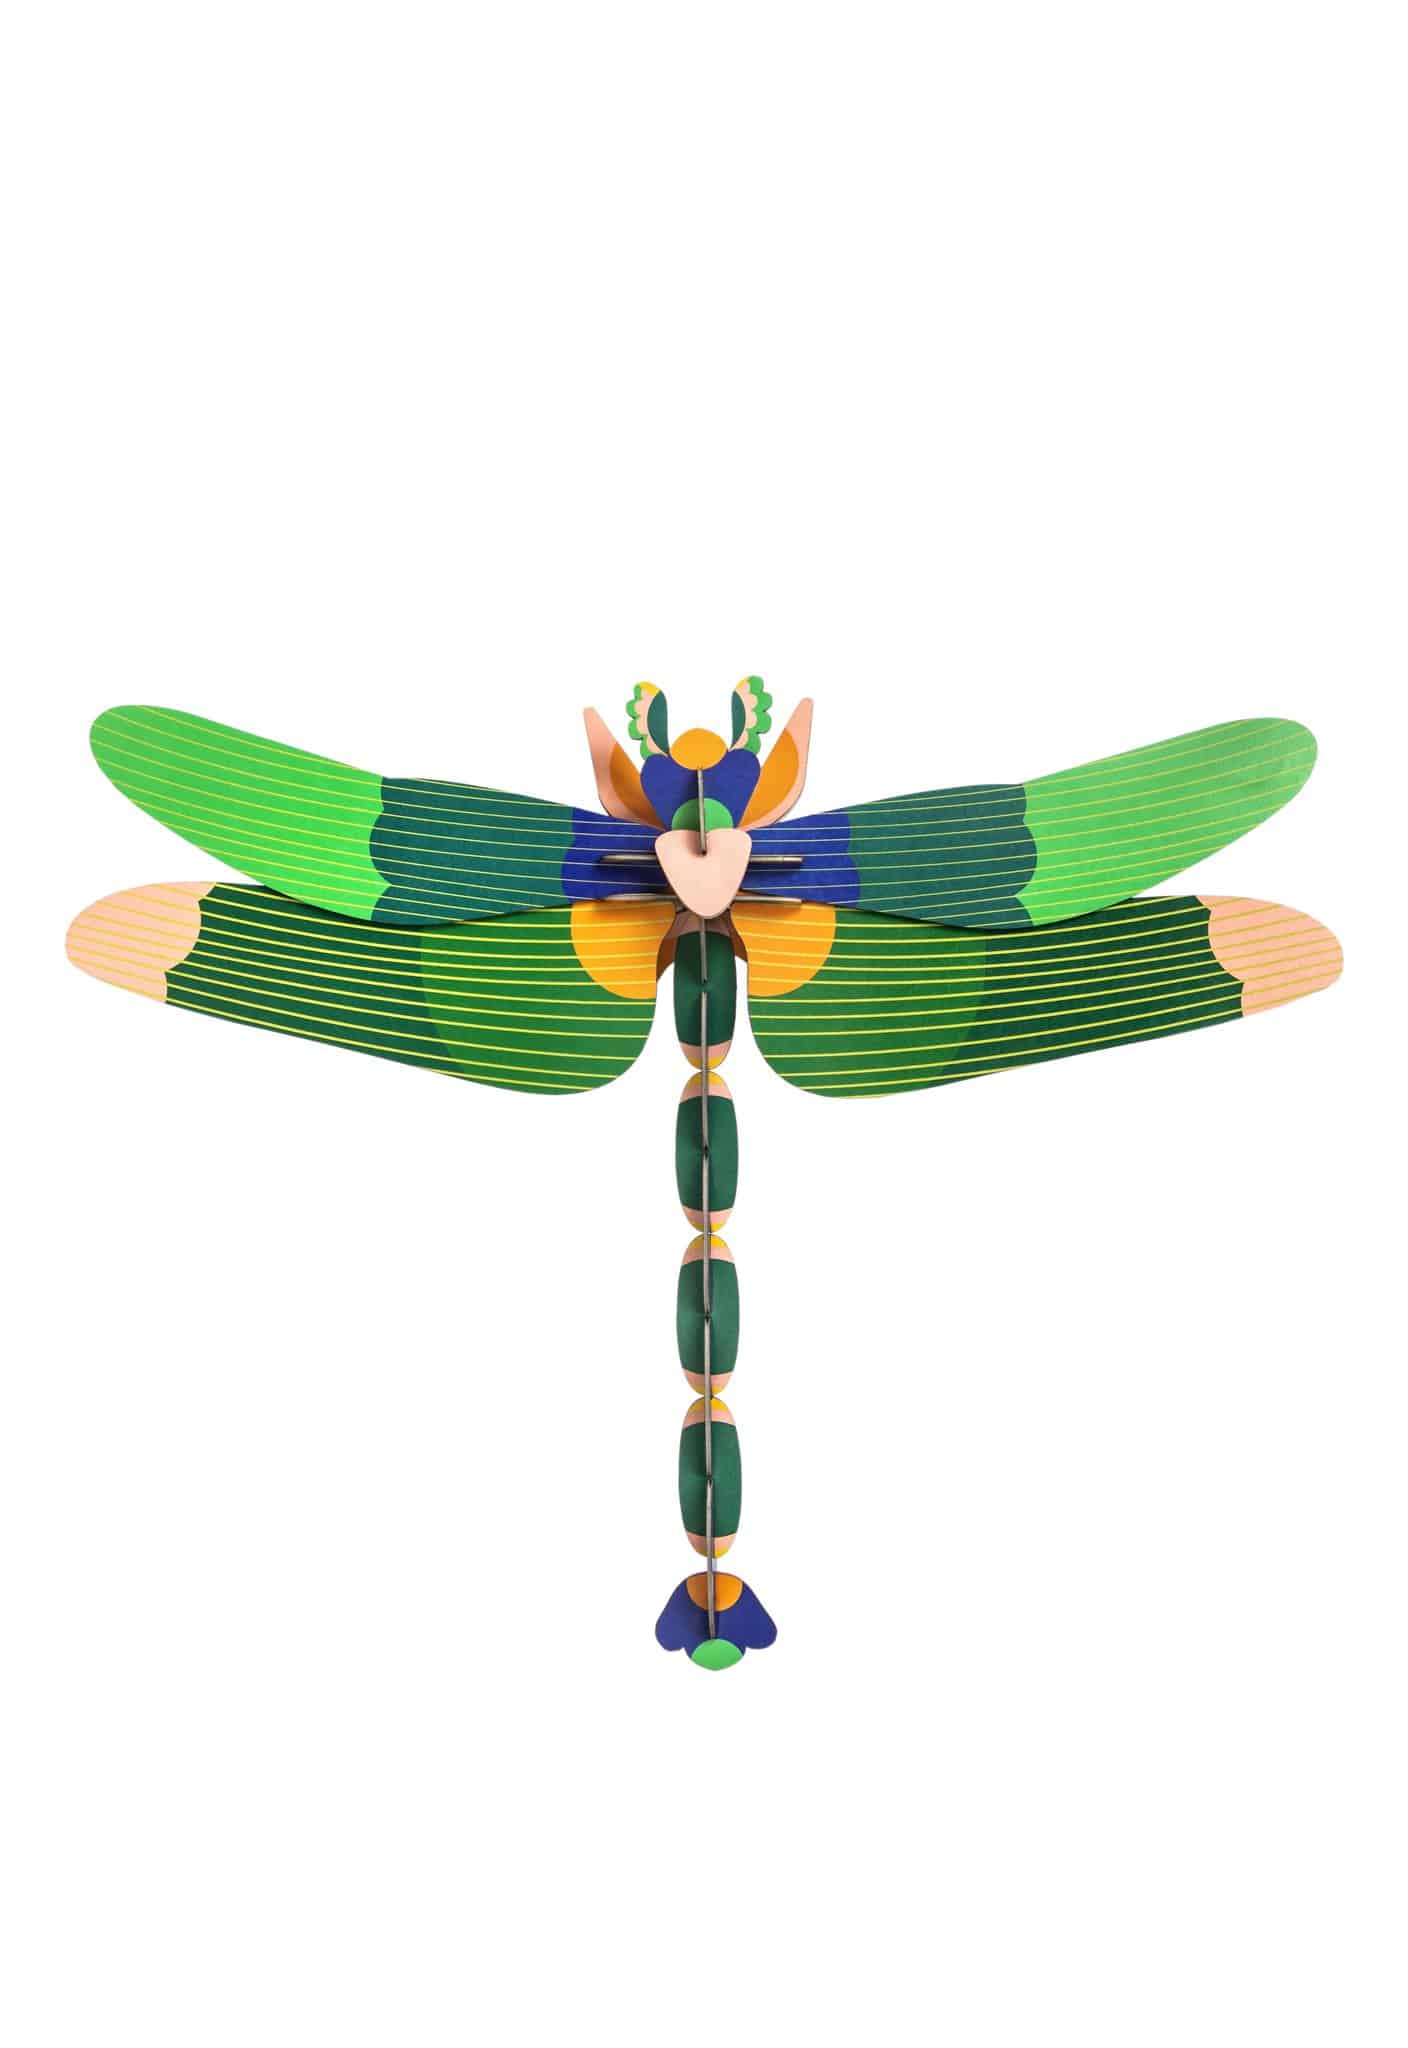 Giant dragonfly, green